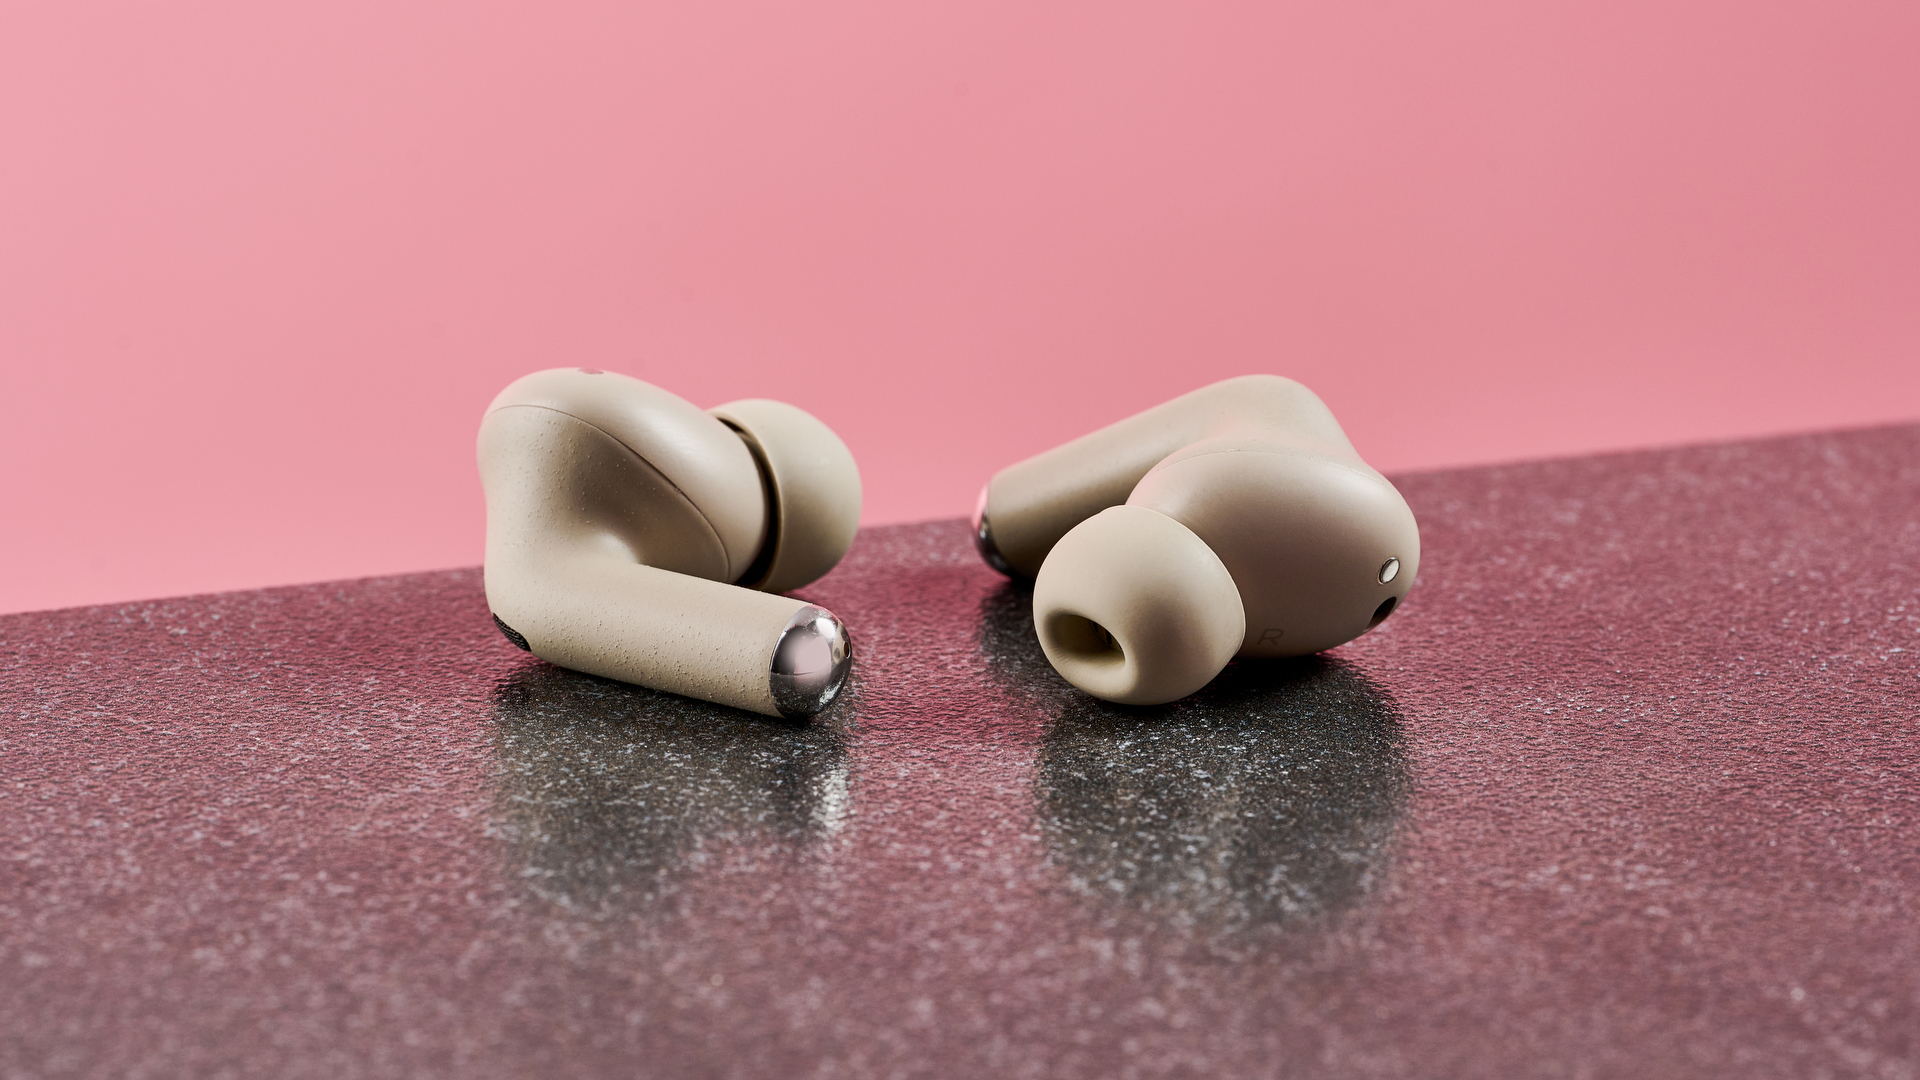 Both Motorola Moto Buds Plus earbuds, one with the silicone tip facing the camera, the other facing backward. They are photographed on a dark surface with a pink background.